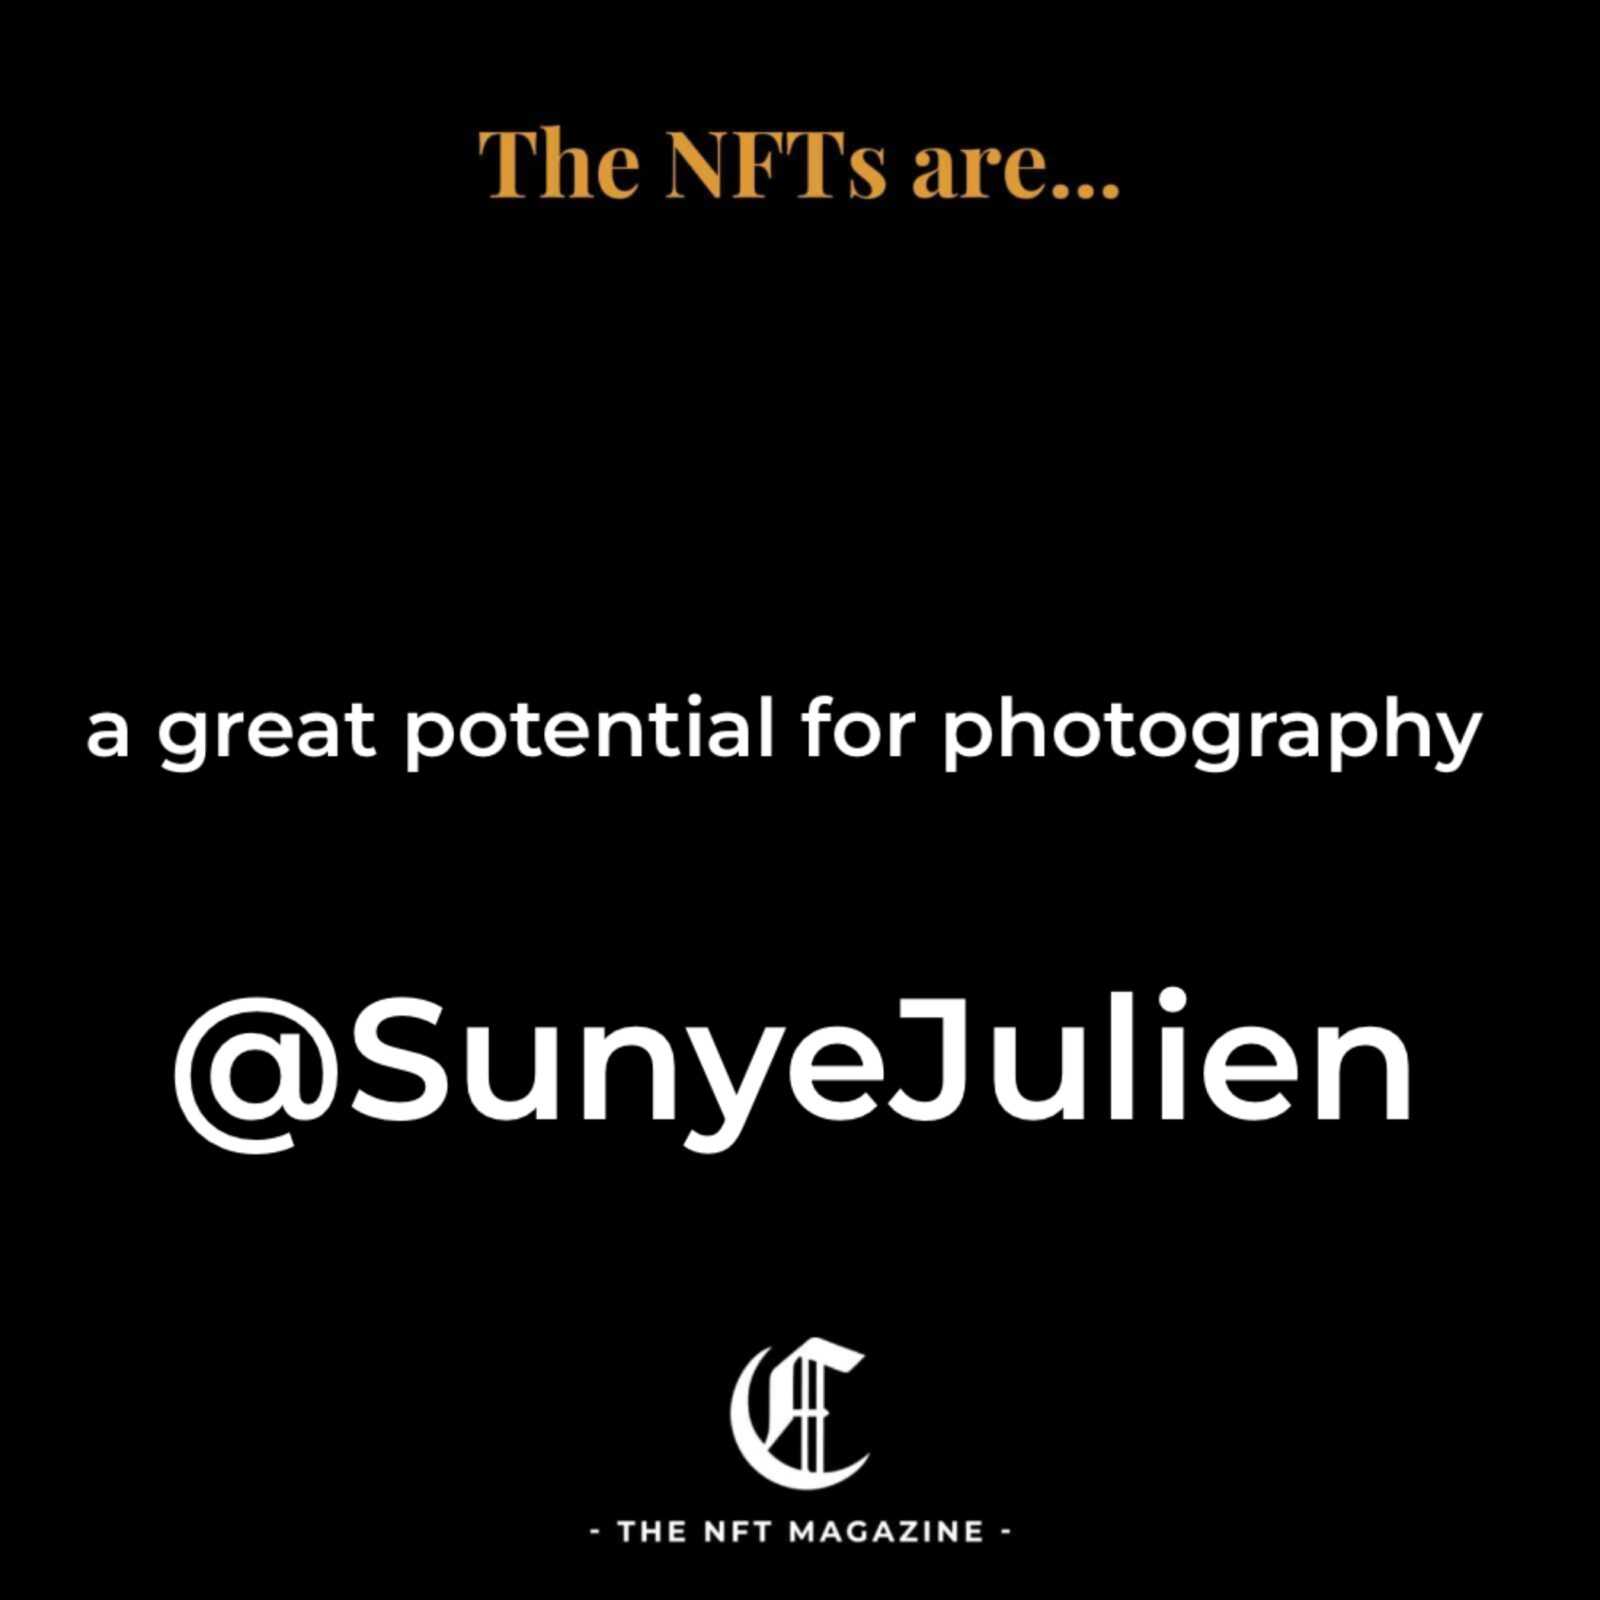 a great potential for photography ... @SunyeJulien